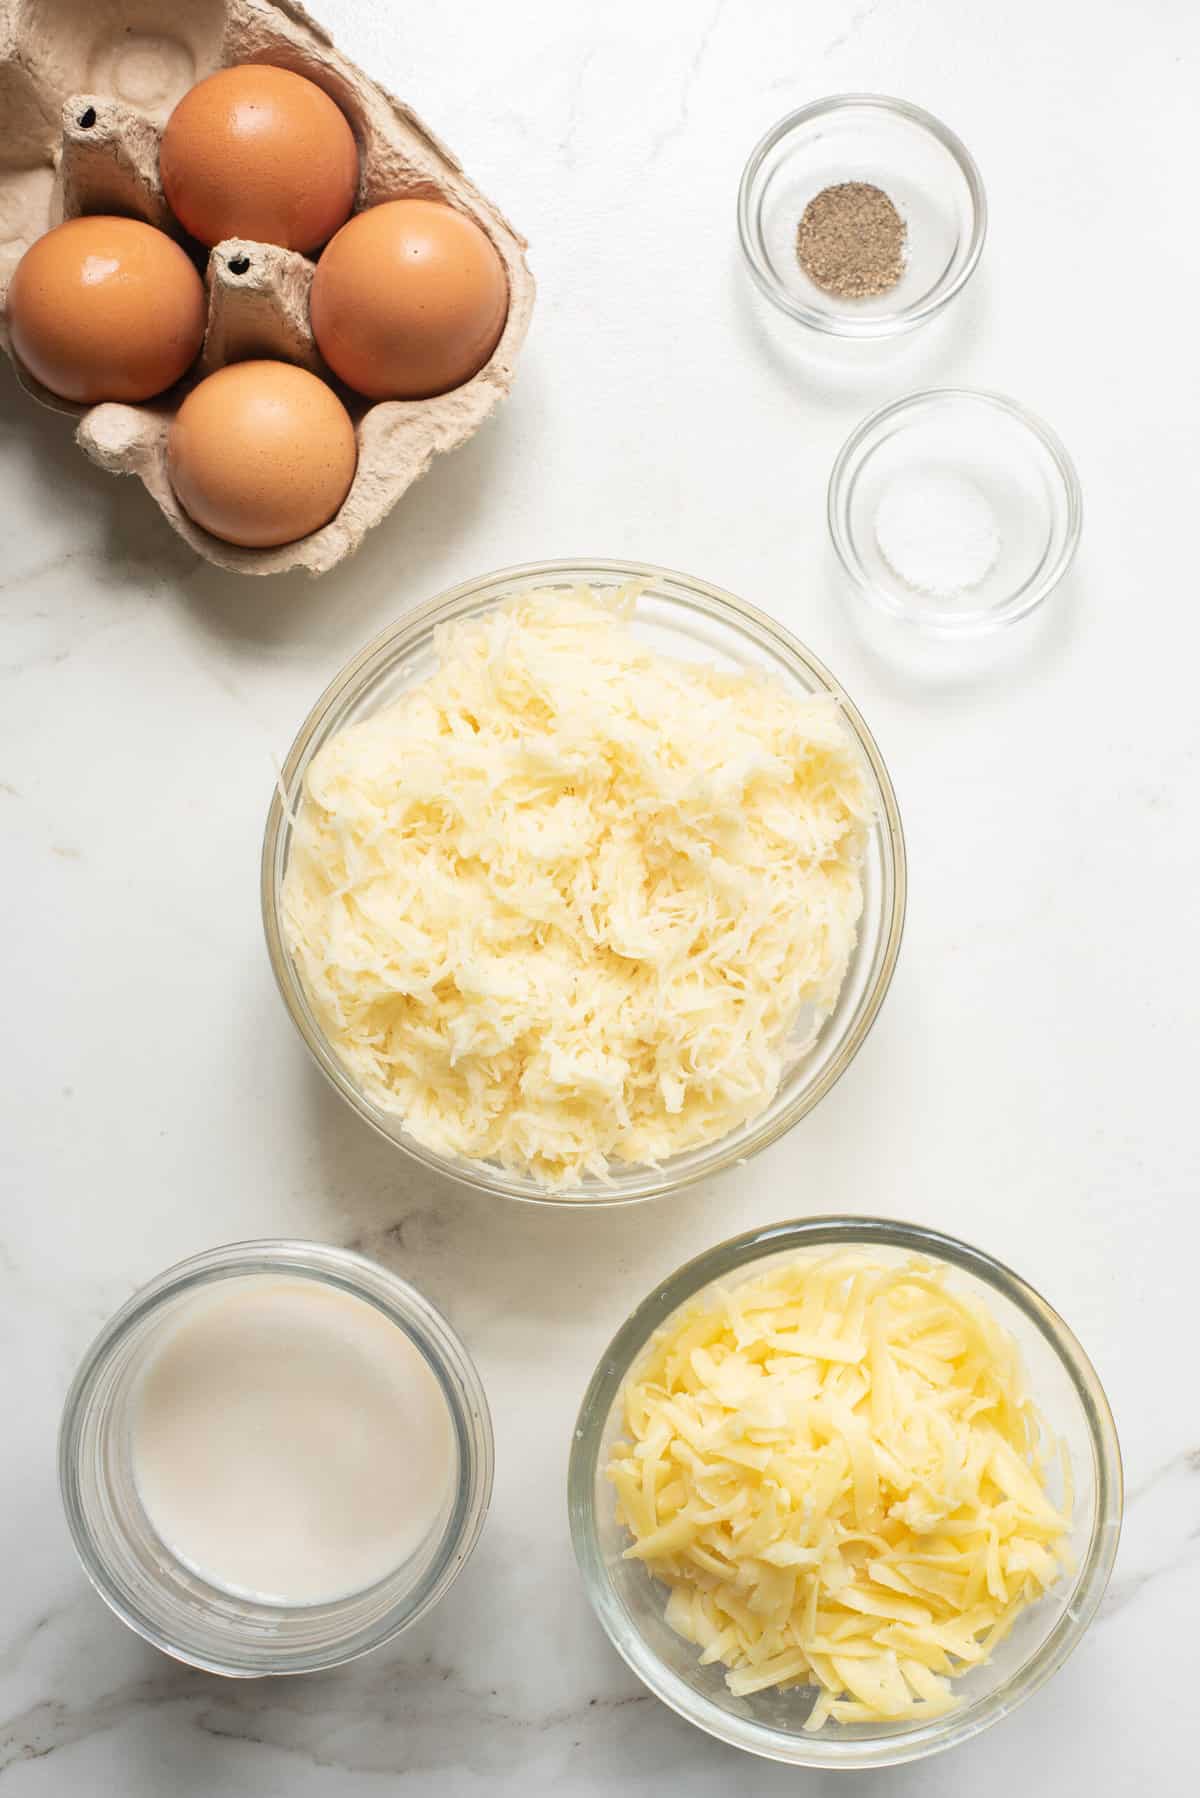 ingredients to make cheesy egg and potatoes casserole